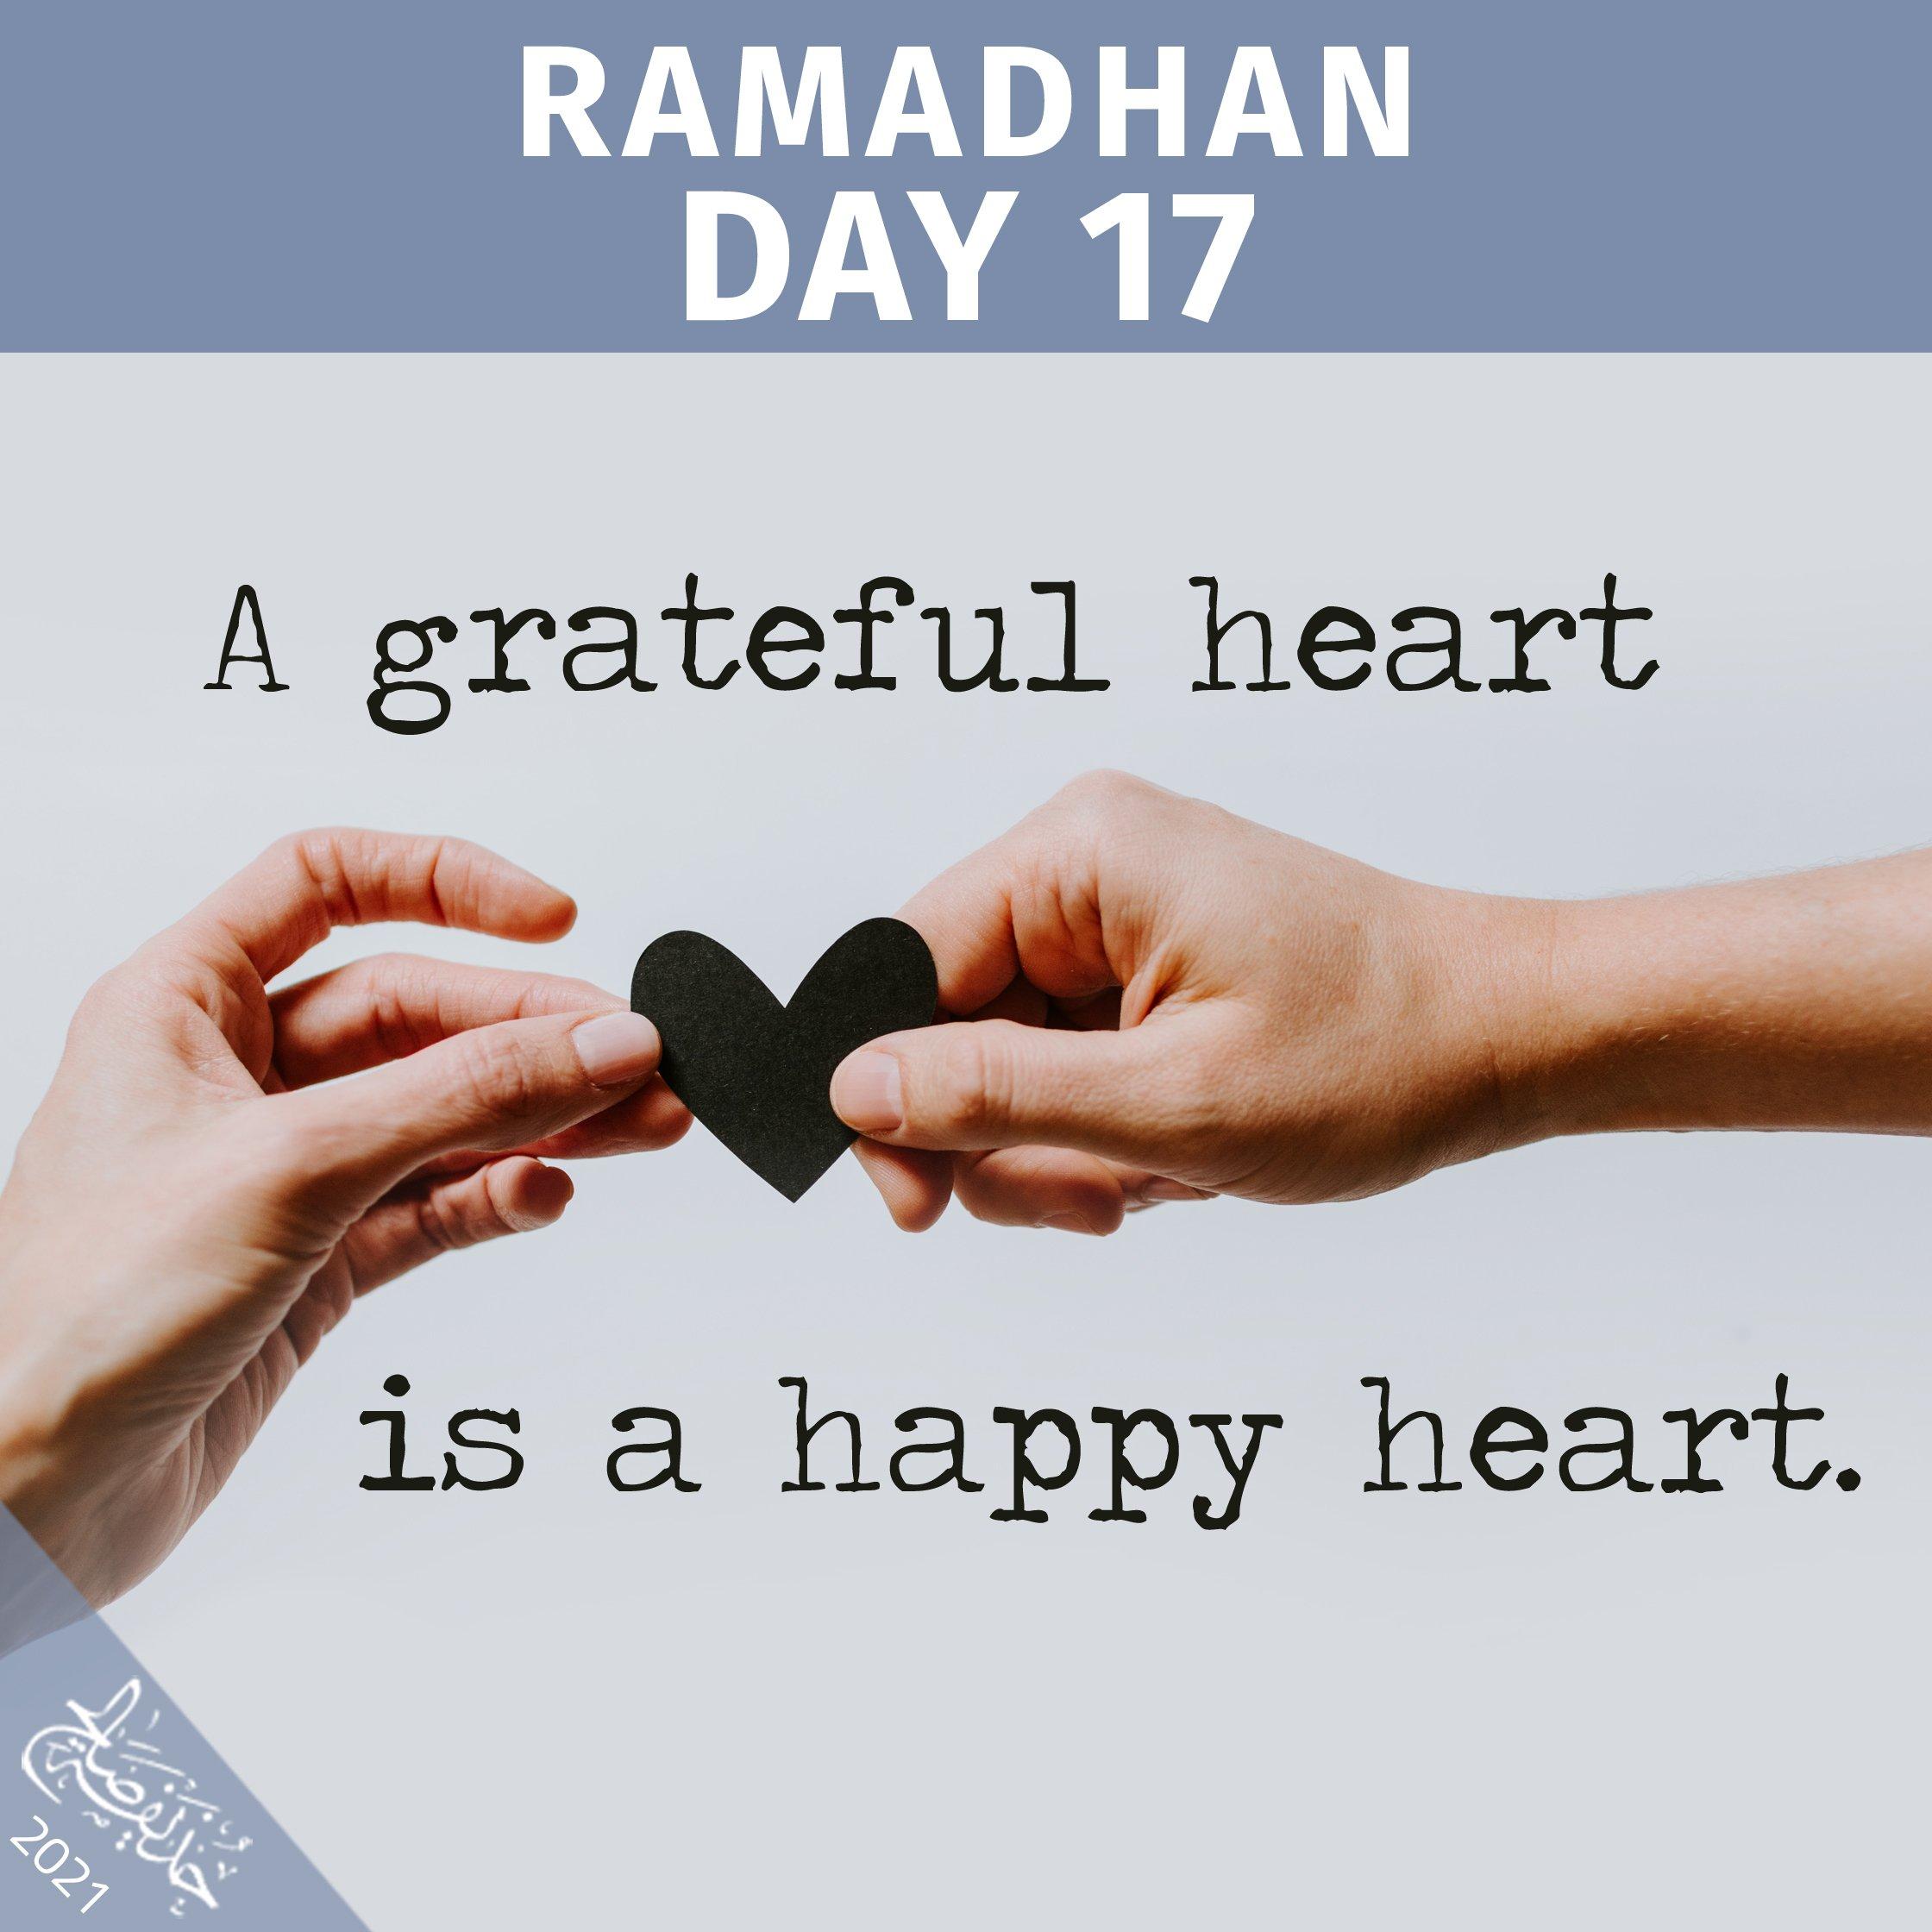 E0G0fa7WEAUTS6nformatjpgname4096x4096 1 - Daily Ramadhan Reminders (2021)